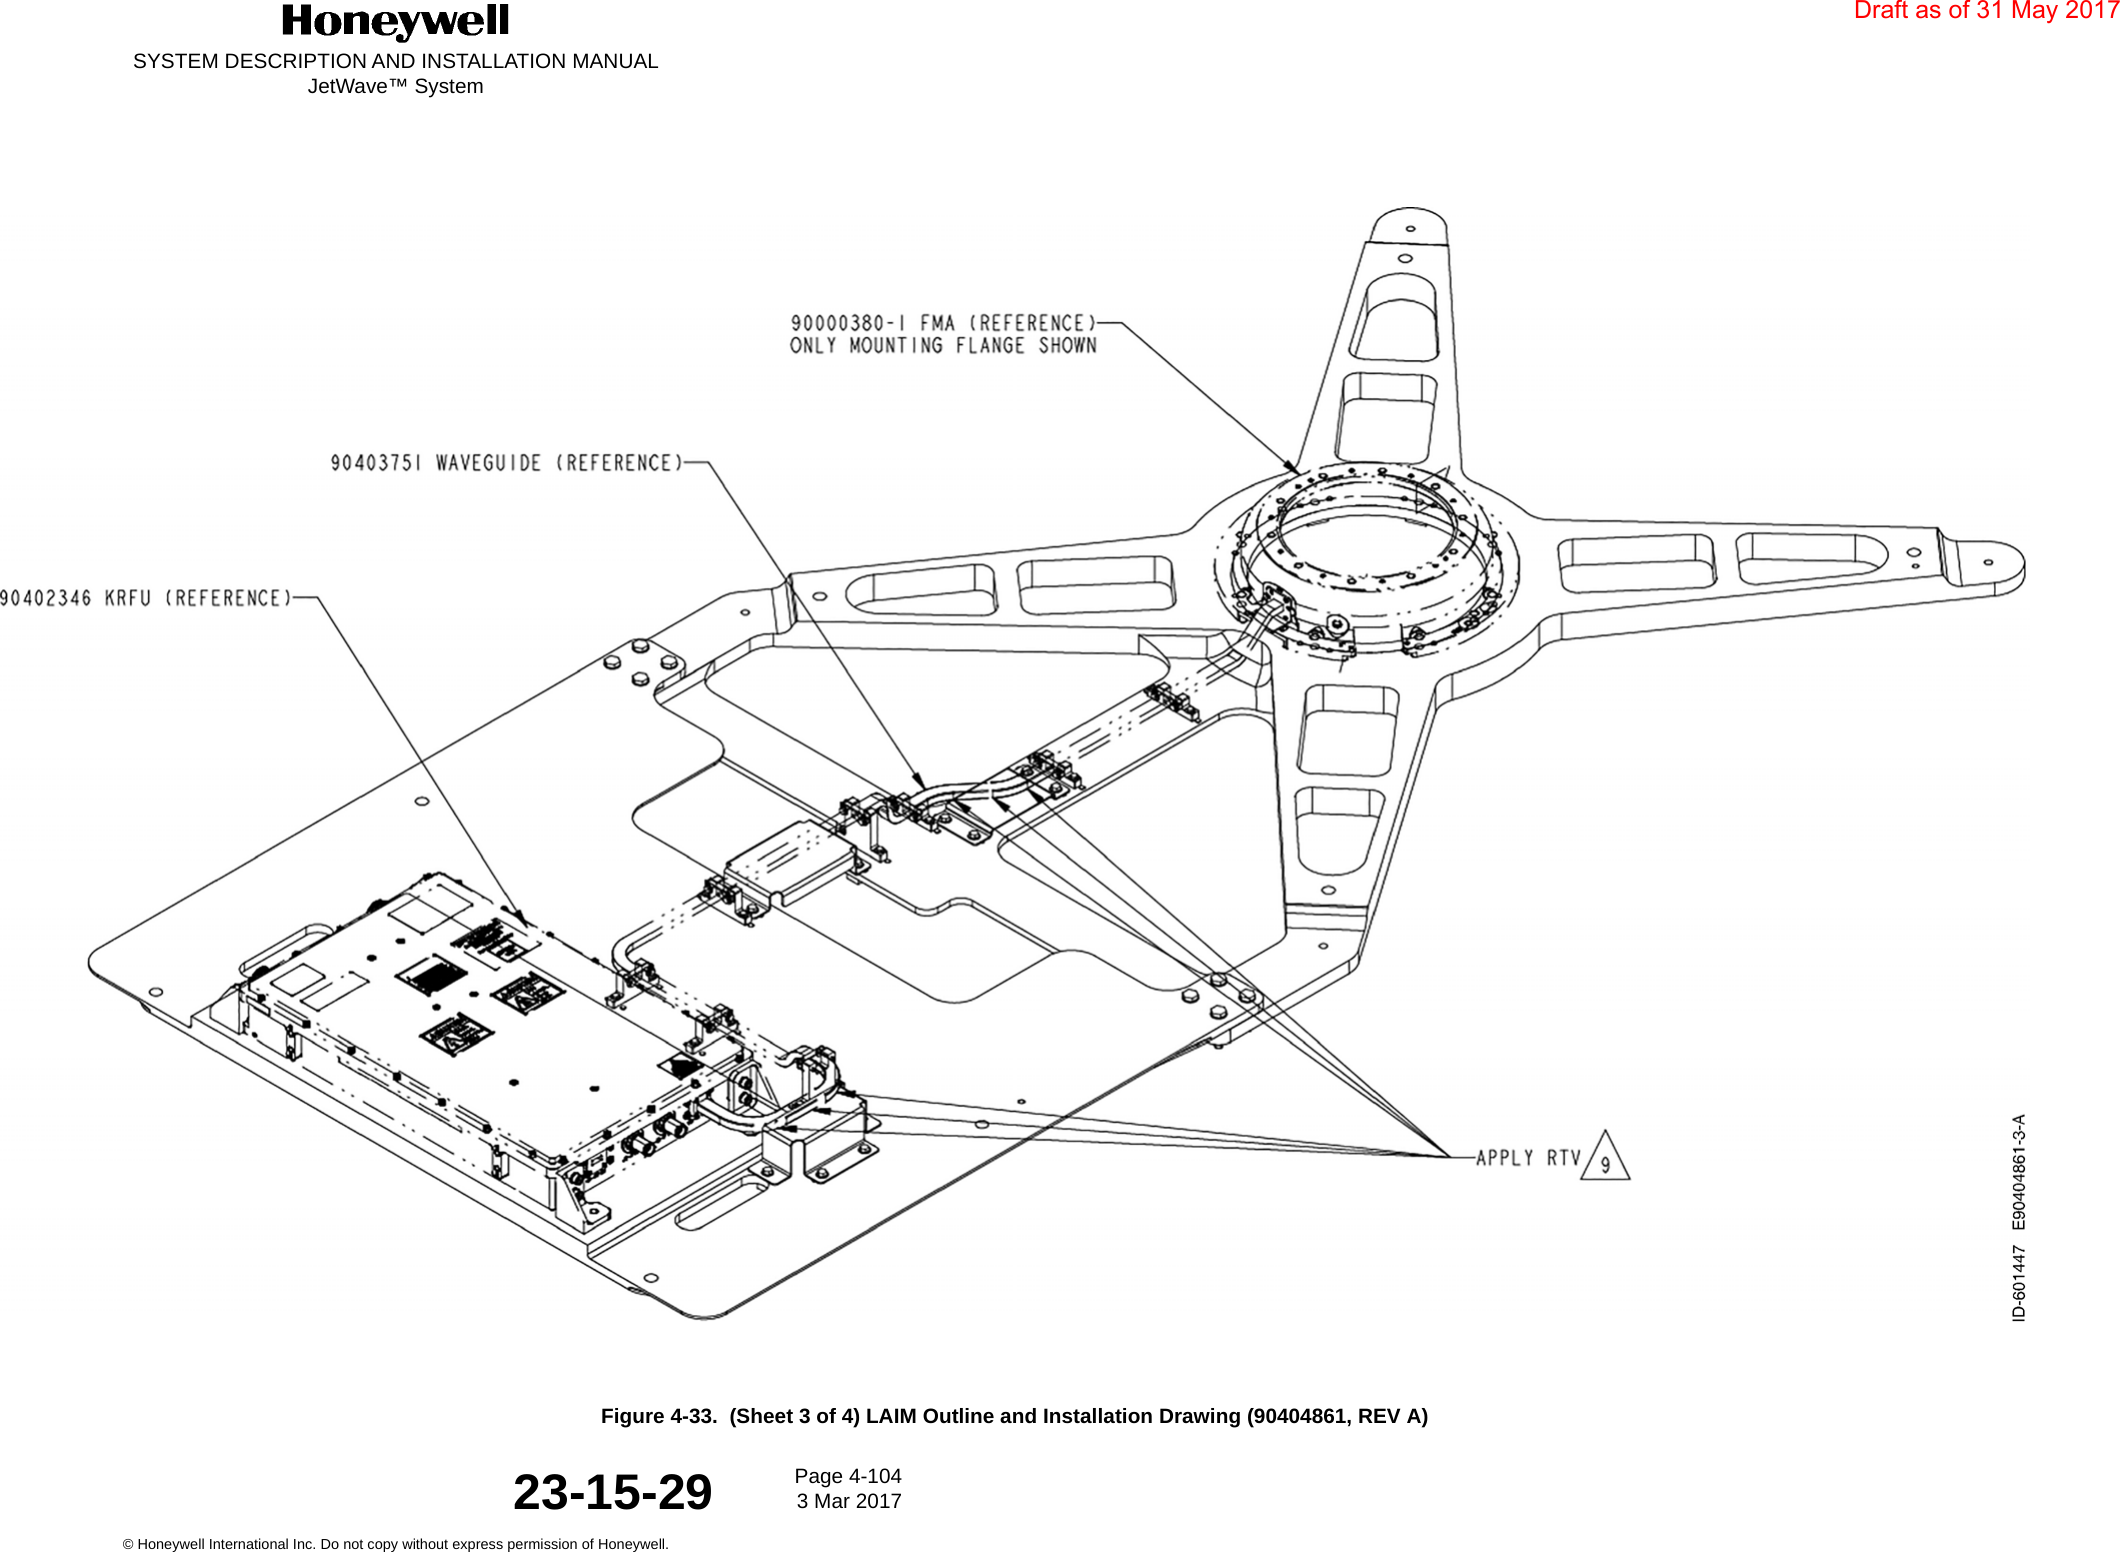 SYSTEM DESCRIPTION AND INSTALLATION MANUALJetWave™ SystemPage 4-104 3 Mar 2017© Honeywell International Inc. Do not copy without express permission of Honeywell.23-15-29Figure 4-33.  (Sheet 3 of 4) LAIM Outline and Installation Drawing (90404861, REV A)Draft as of 31 May 2017